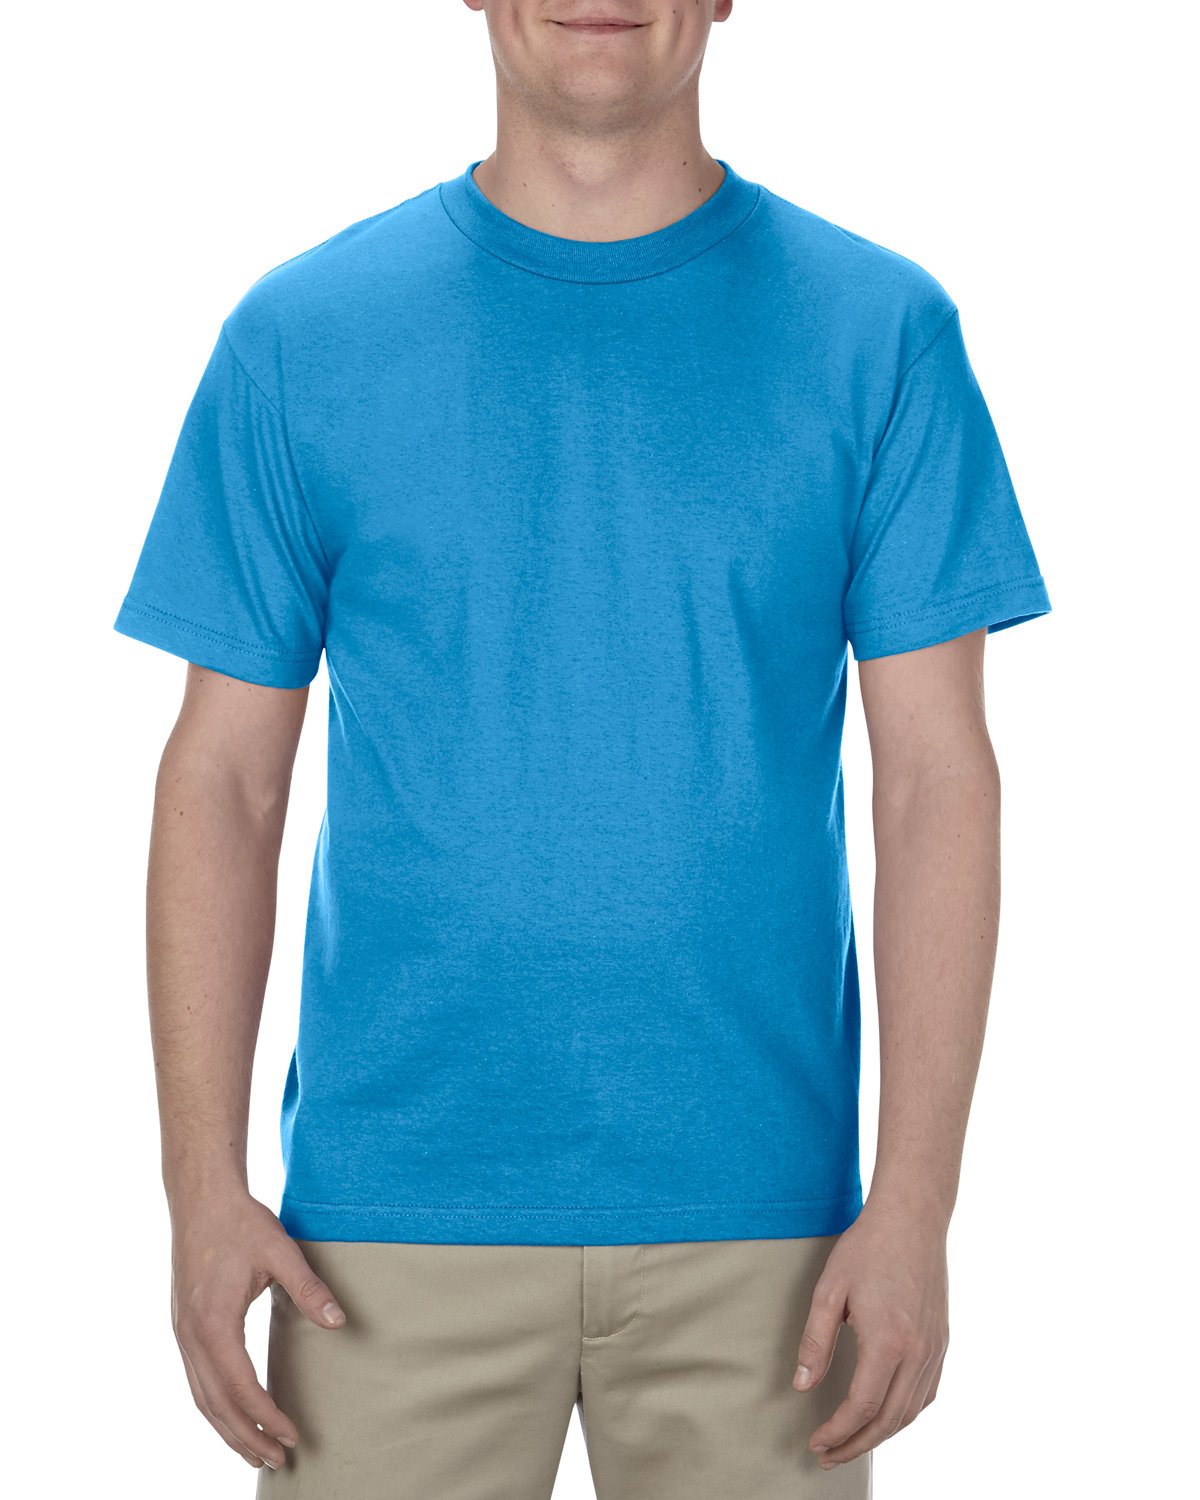 American Apparel Adult 6.0 oz., 100% Cotton T-Shirt TURQUOISE 